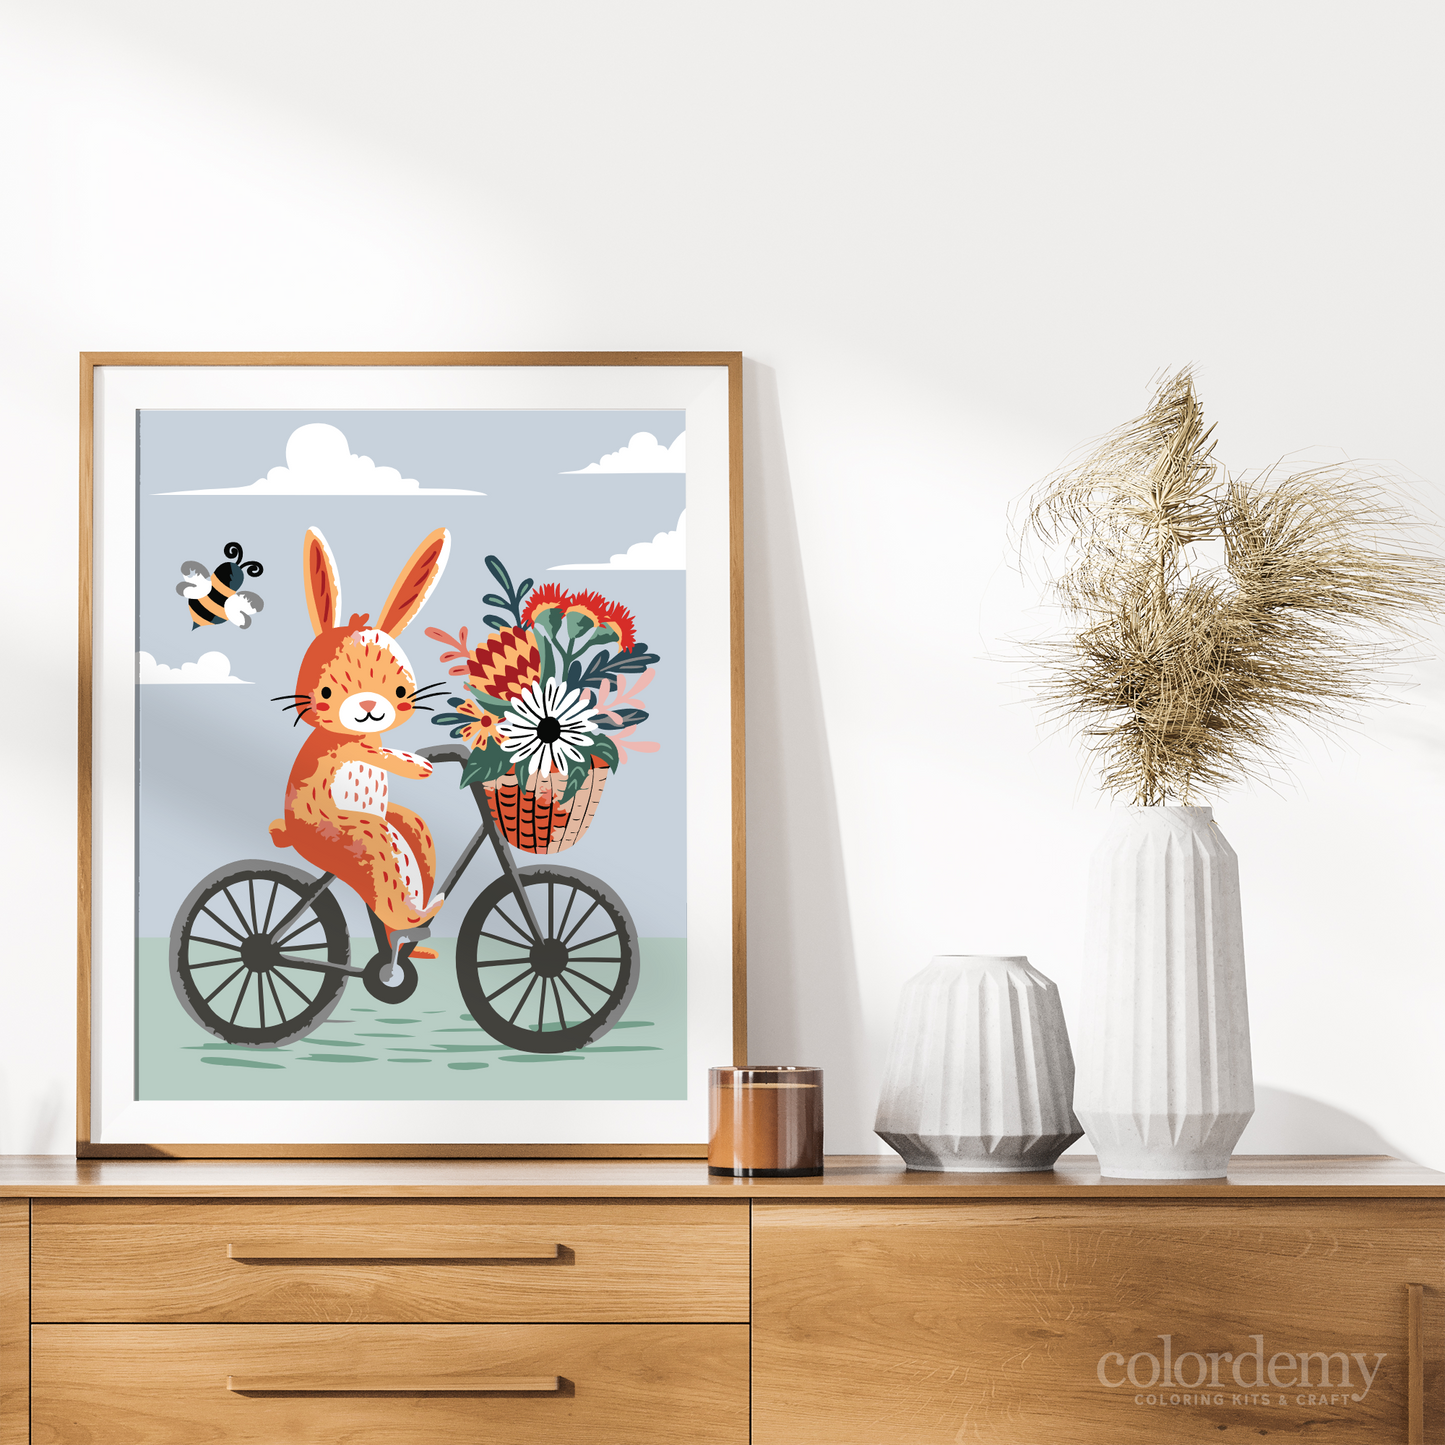 40x50cm Paint by Numbers Kit: Bunny's Breezy Ride: Bicycle Adventure with Bee